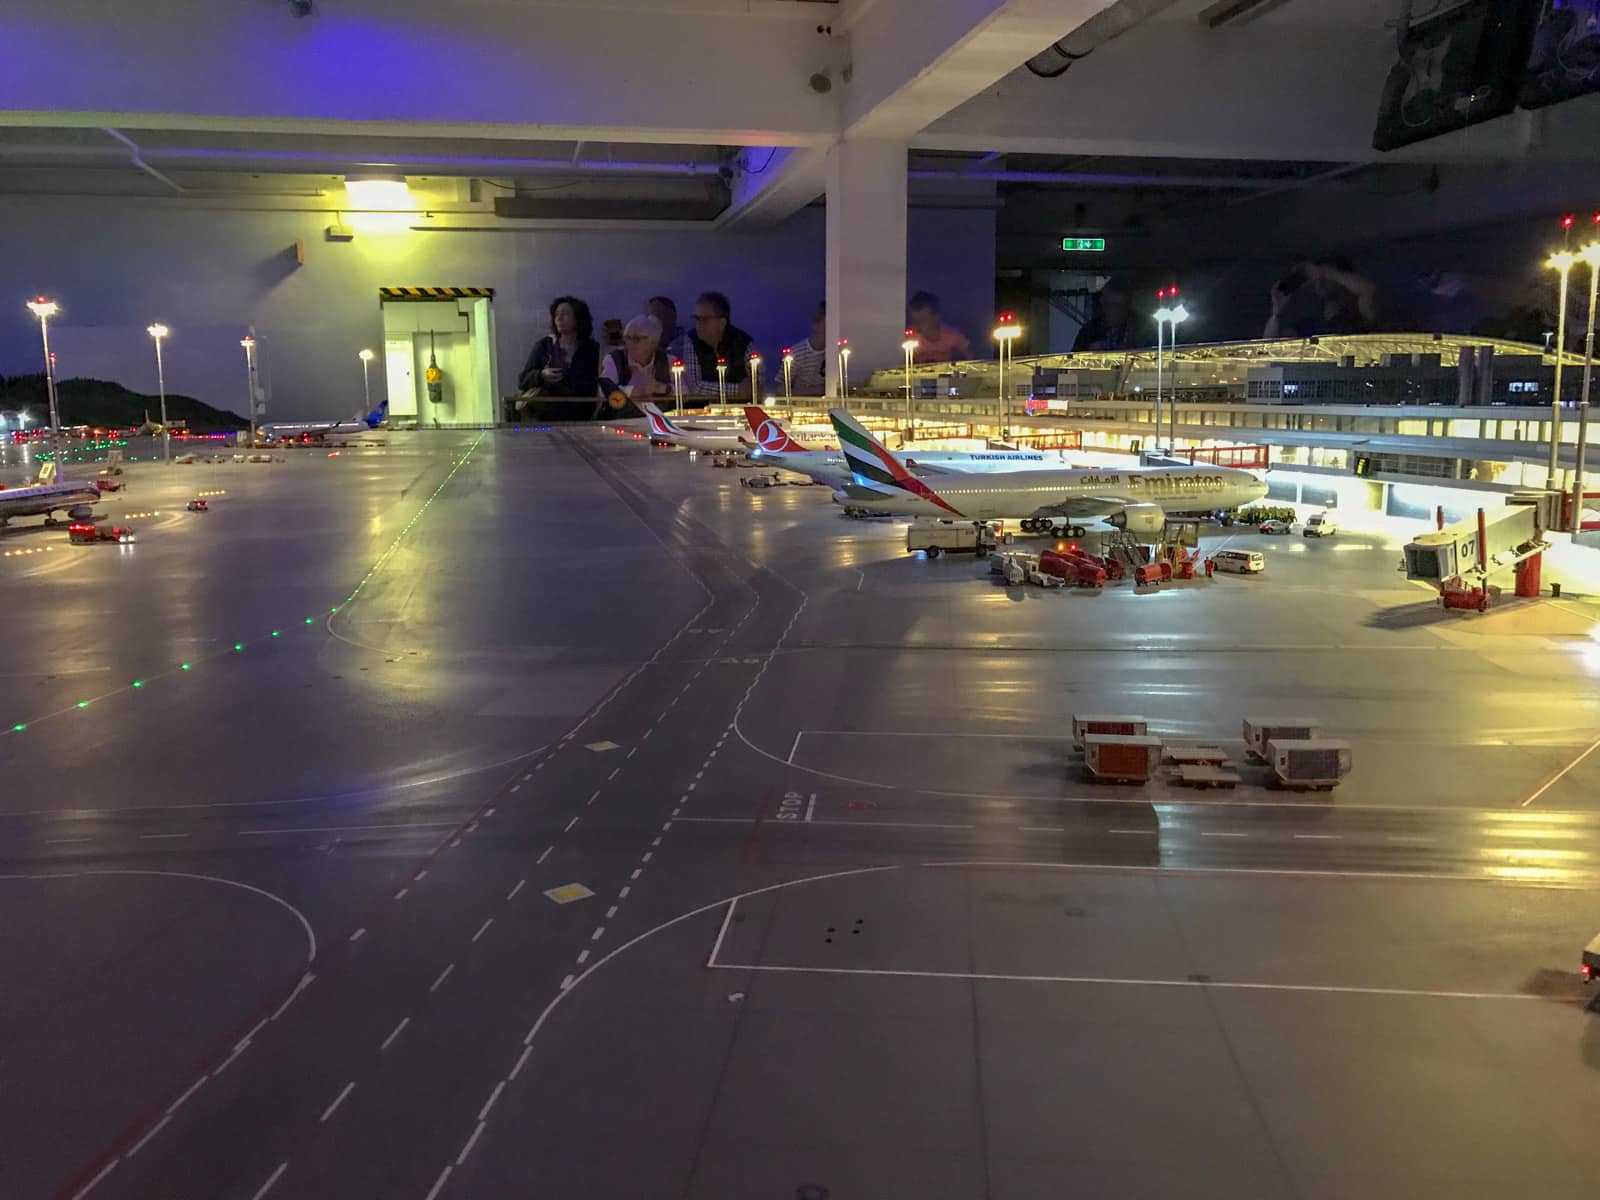 A model airport as part of an indoor model railway. The lights are off to simulate night-time